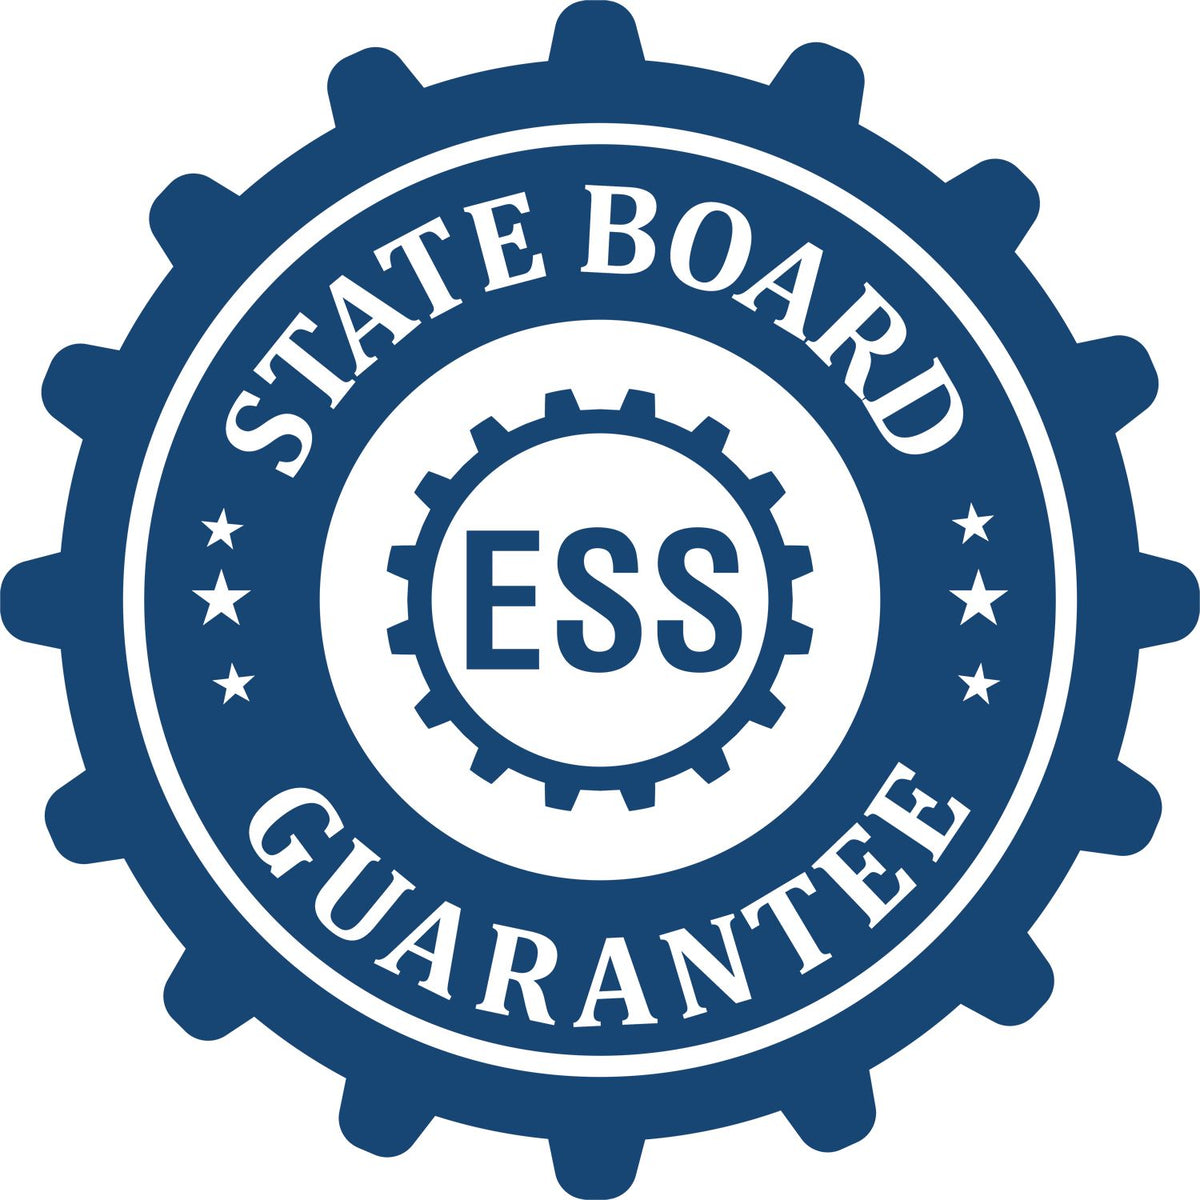 An emblem in a gear shape illustrating a state board guarantee for the Digital Hawaii Landscape Architect Stamp product.